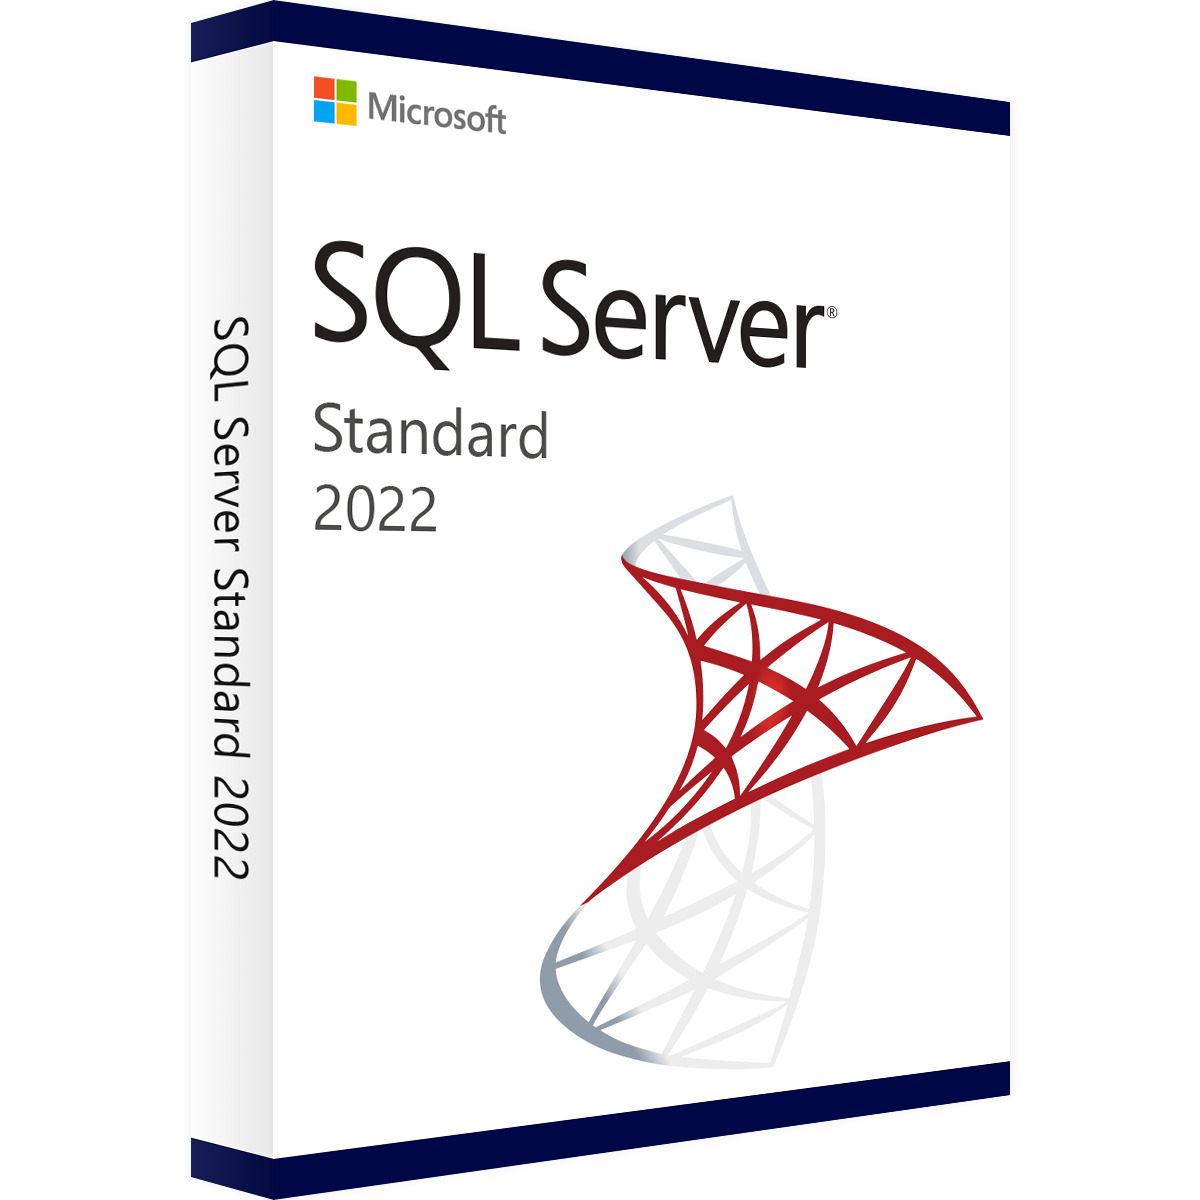 Microsoft SQL Server 2022 Standard with 16 Core License, unlimited User CALs